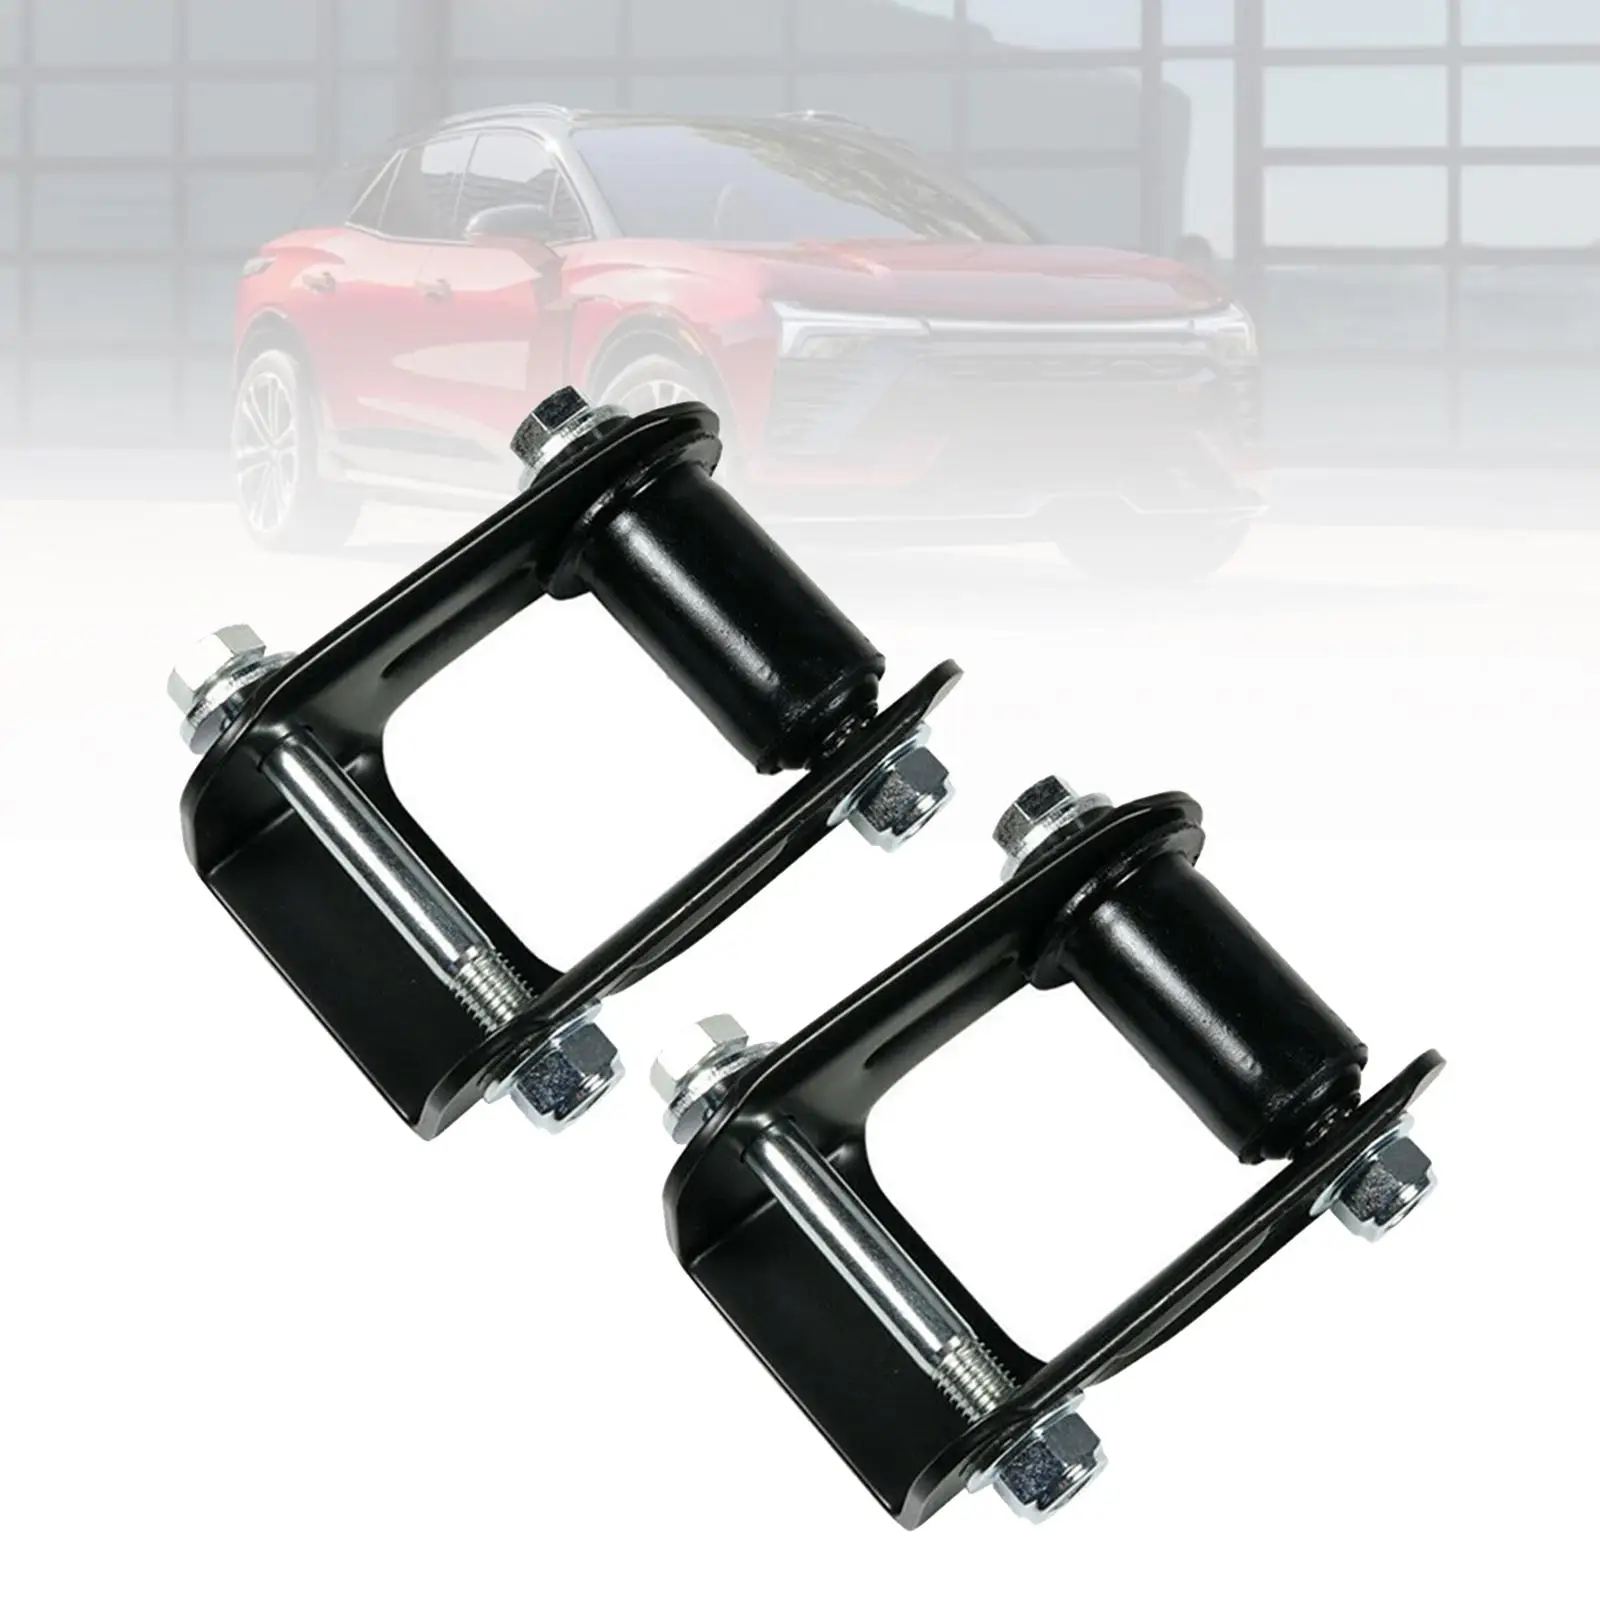 2 Pieces Rear Leaf Spring Shackle Kit Parts Easily Install 15665302 replacement Chevrolet Blazer S10 Blazer S10 Pickup